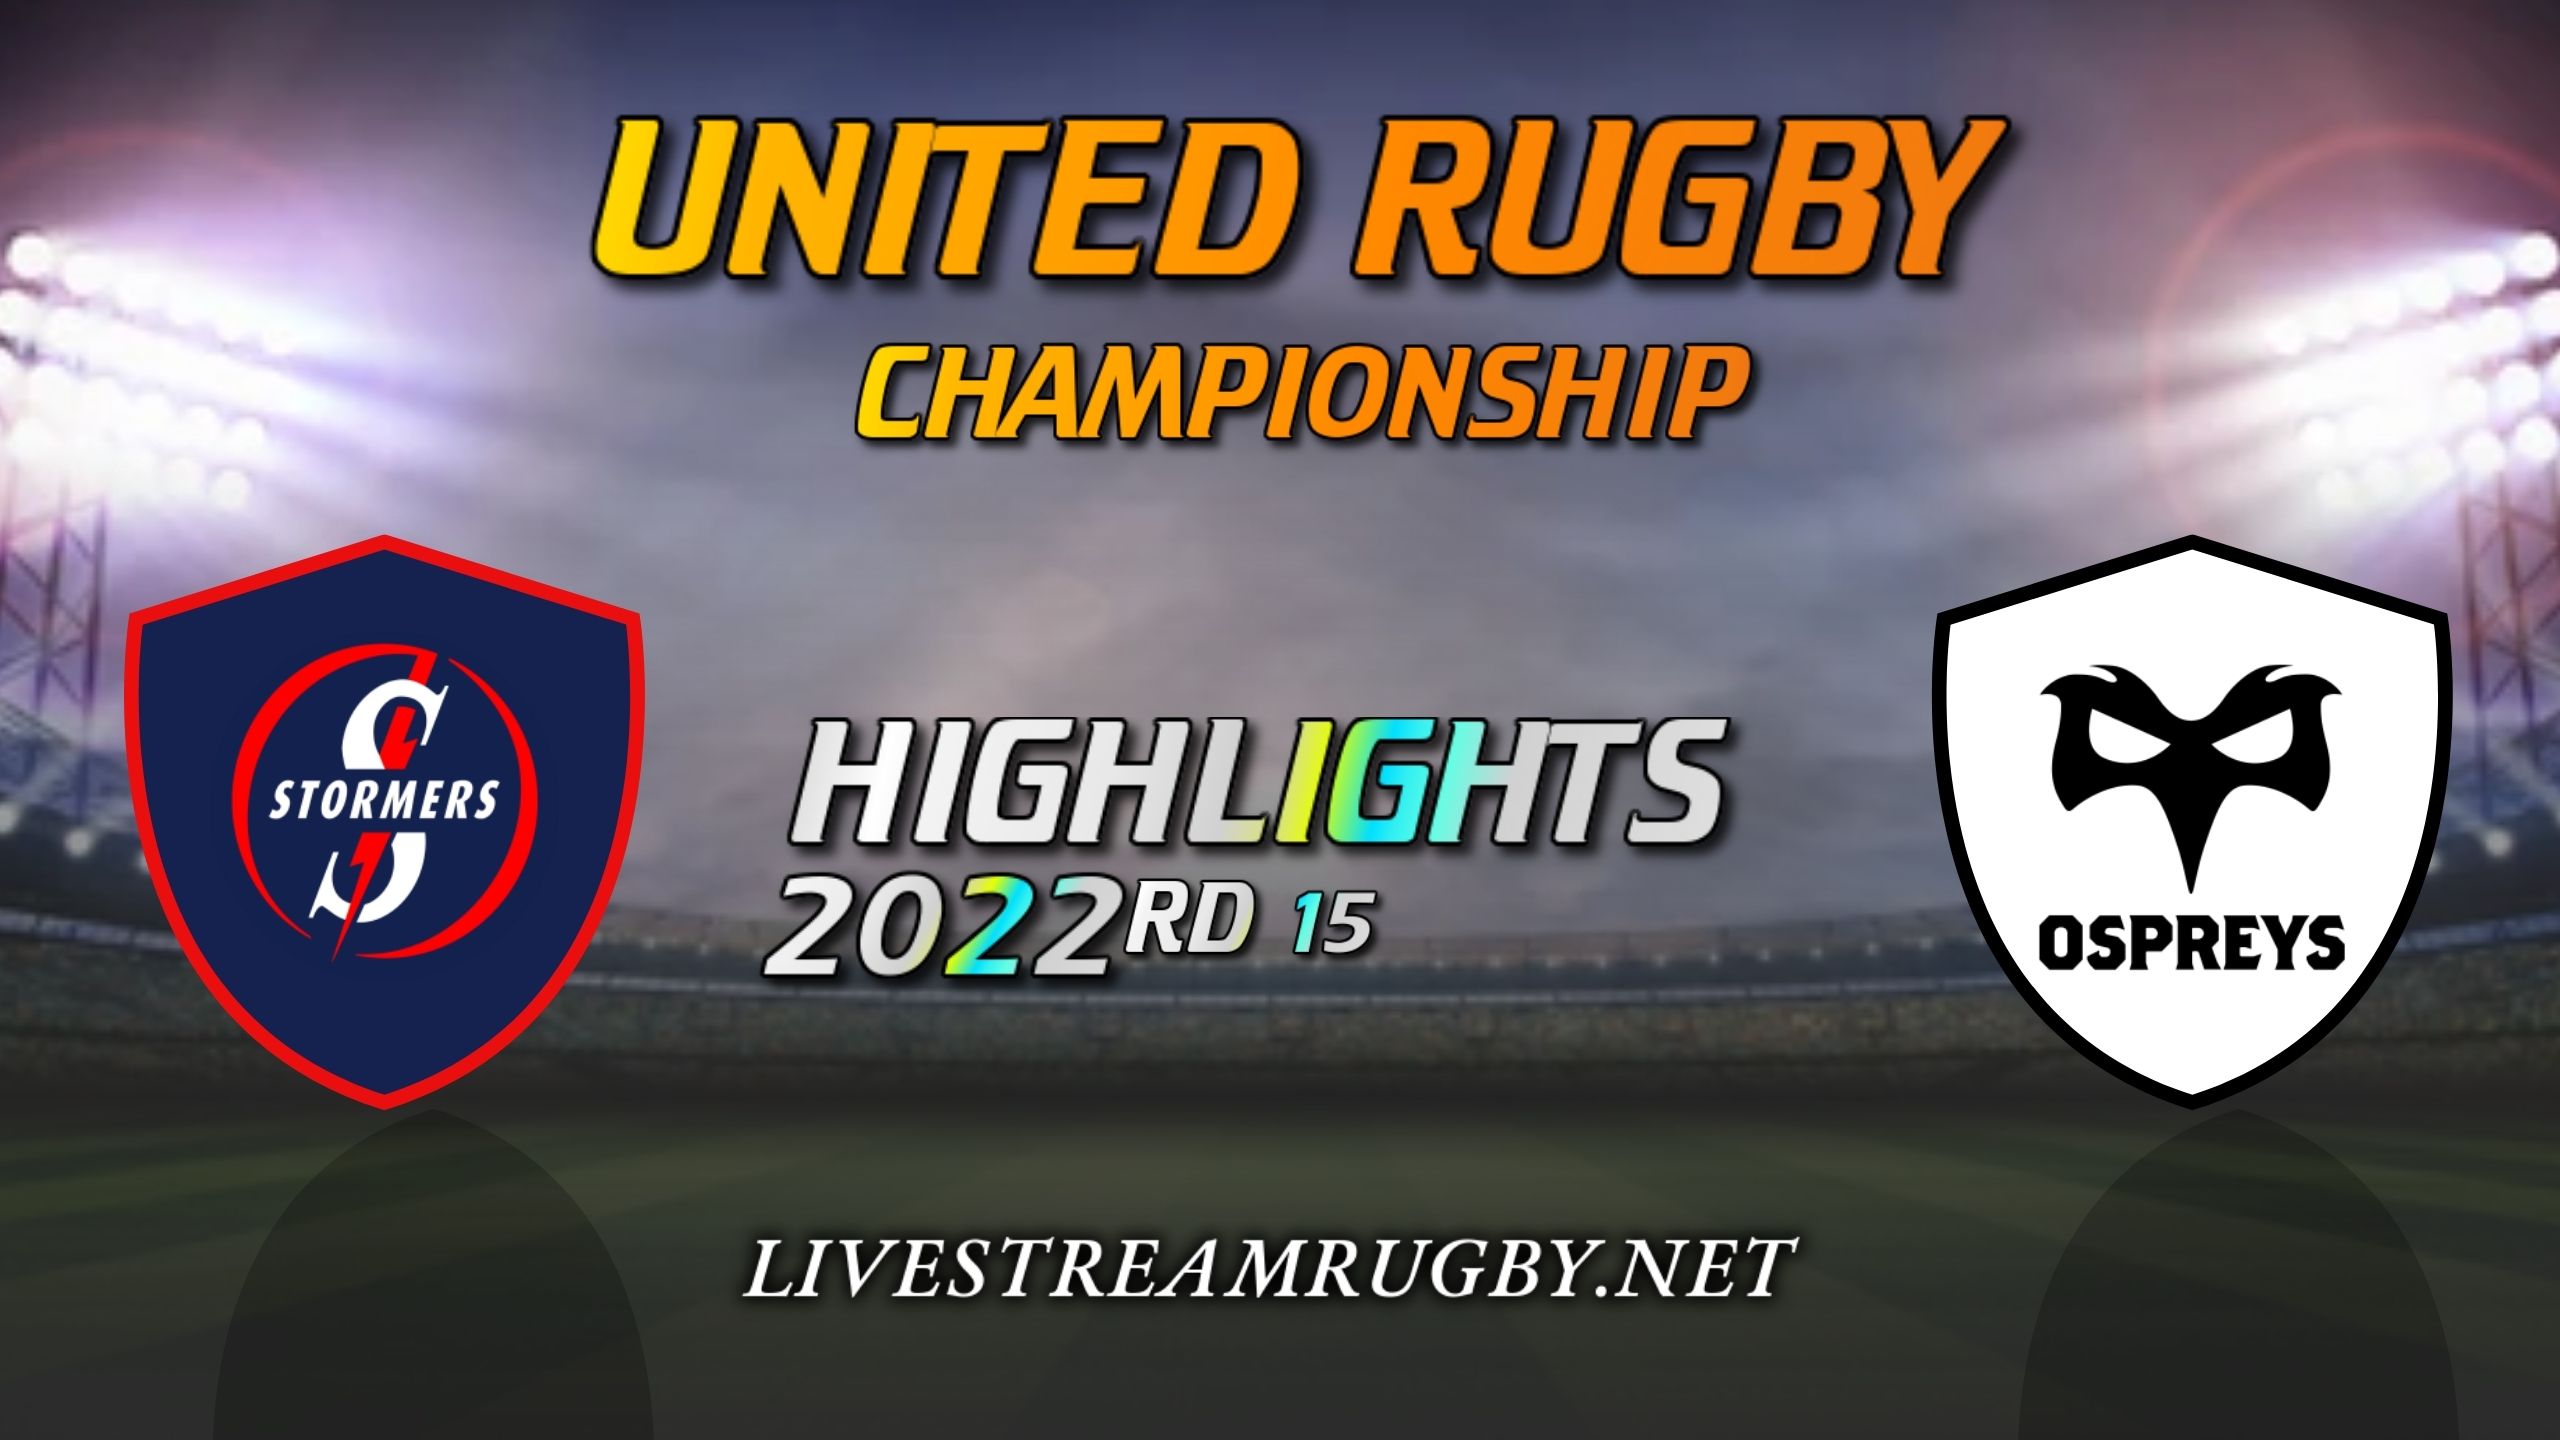 Stormers Vs Ospreys Highlights 2022 Rd 15 United Rugby